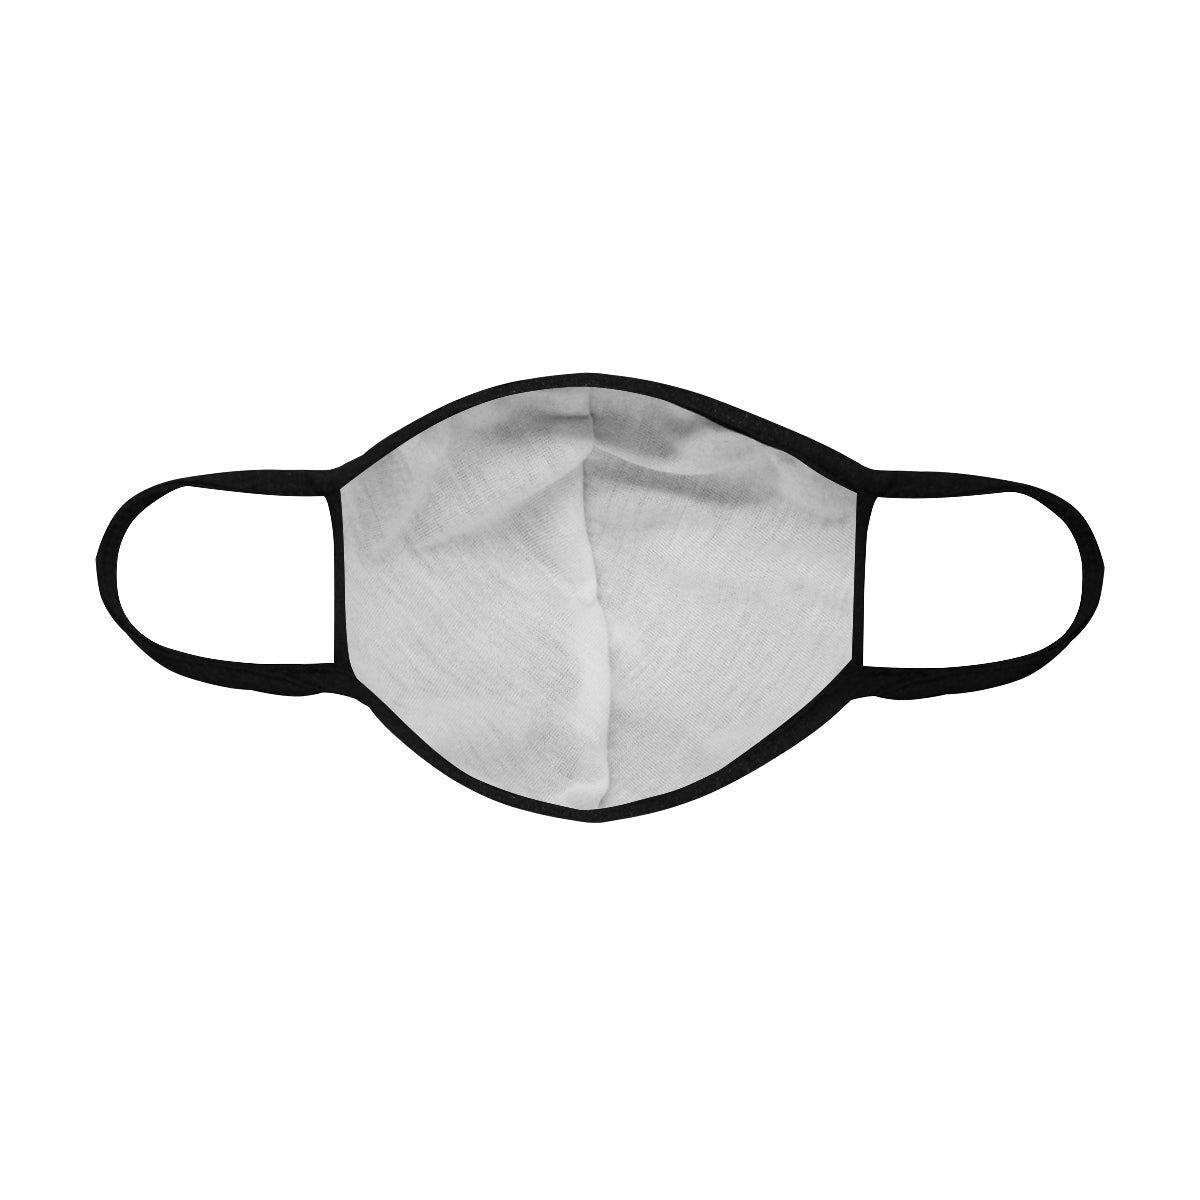 Mind The Print Cotton Fabric Face Mask (30 Filters Included) - Non-medical use